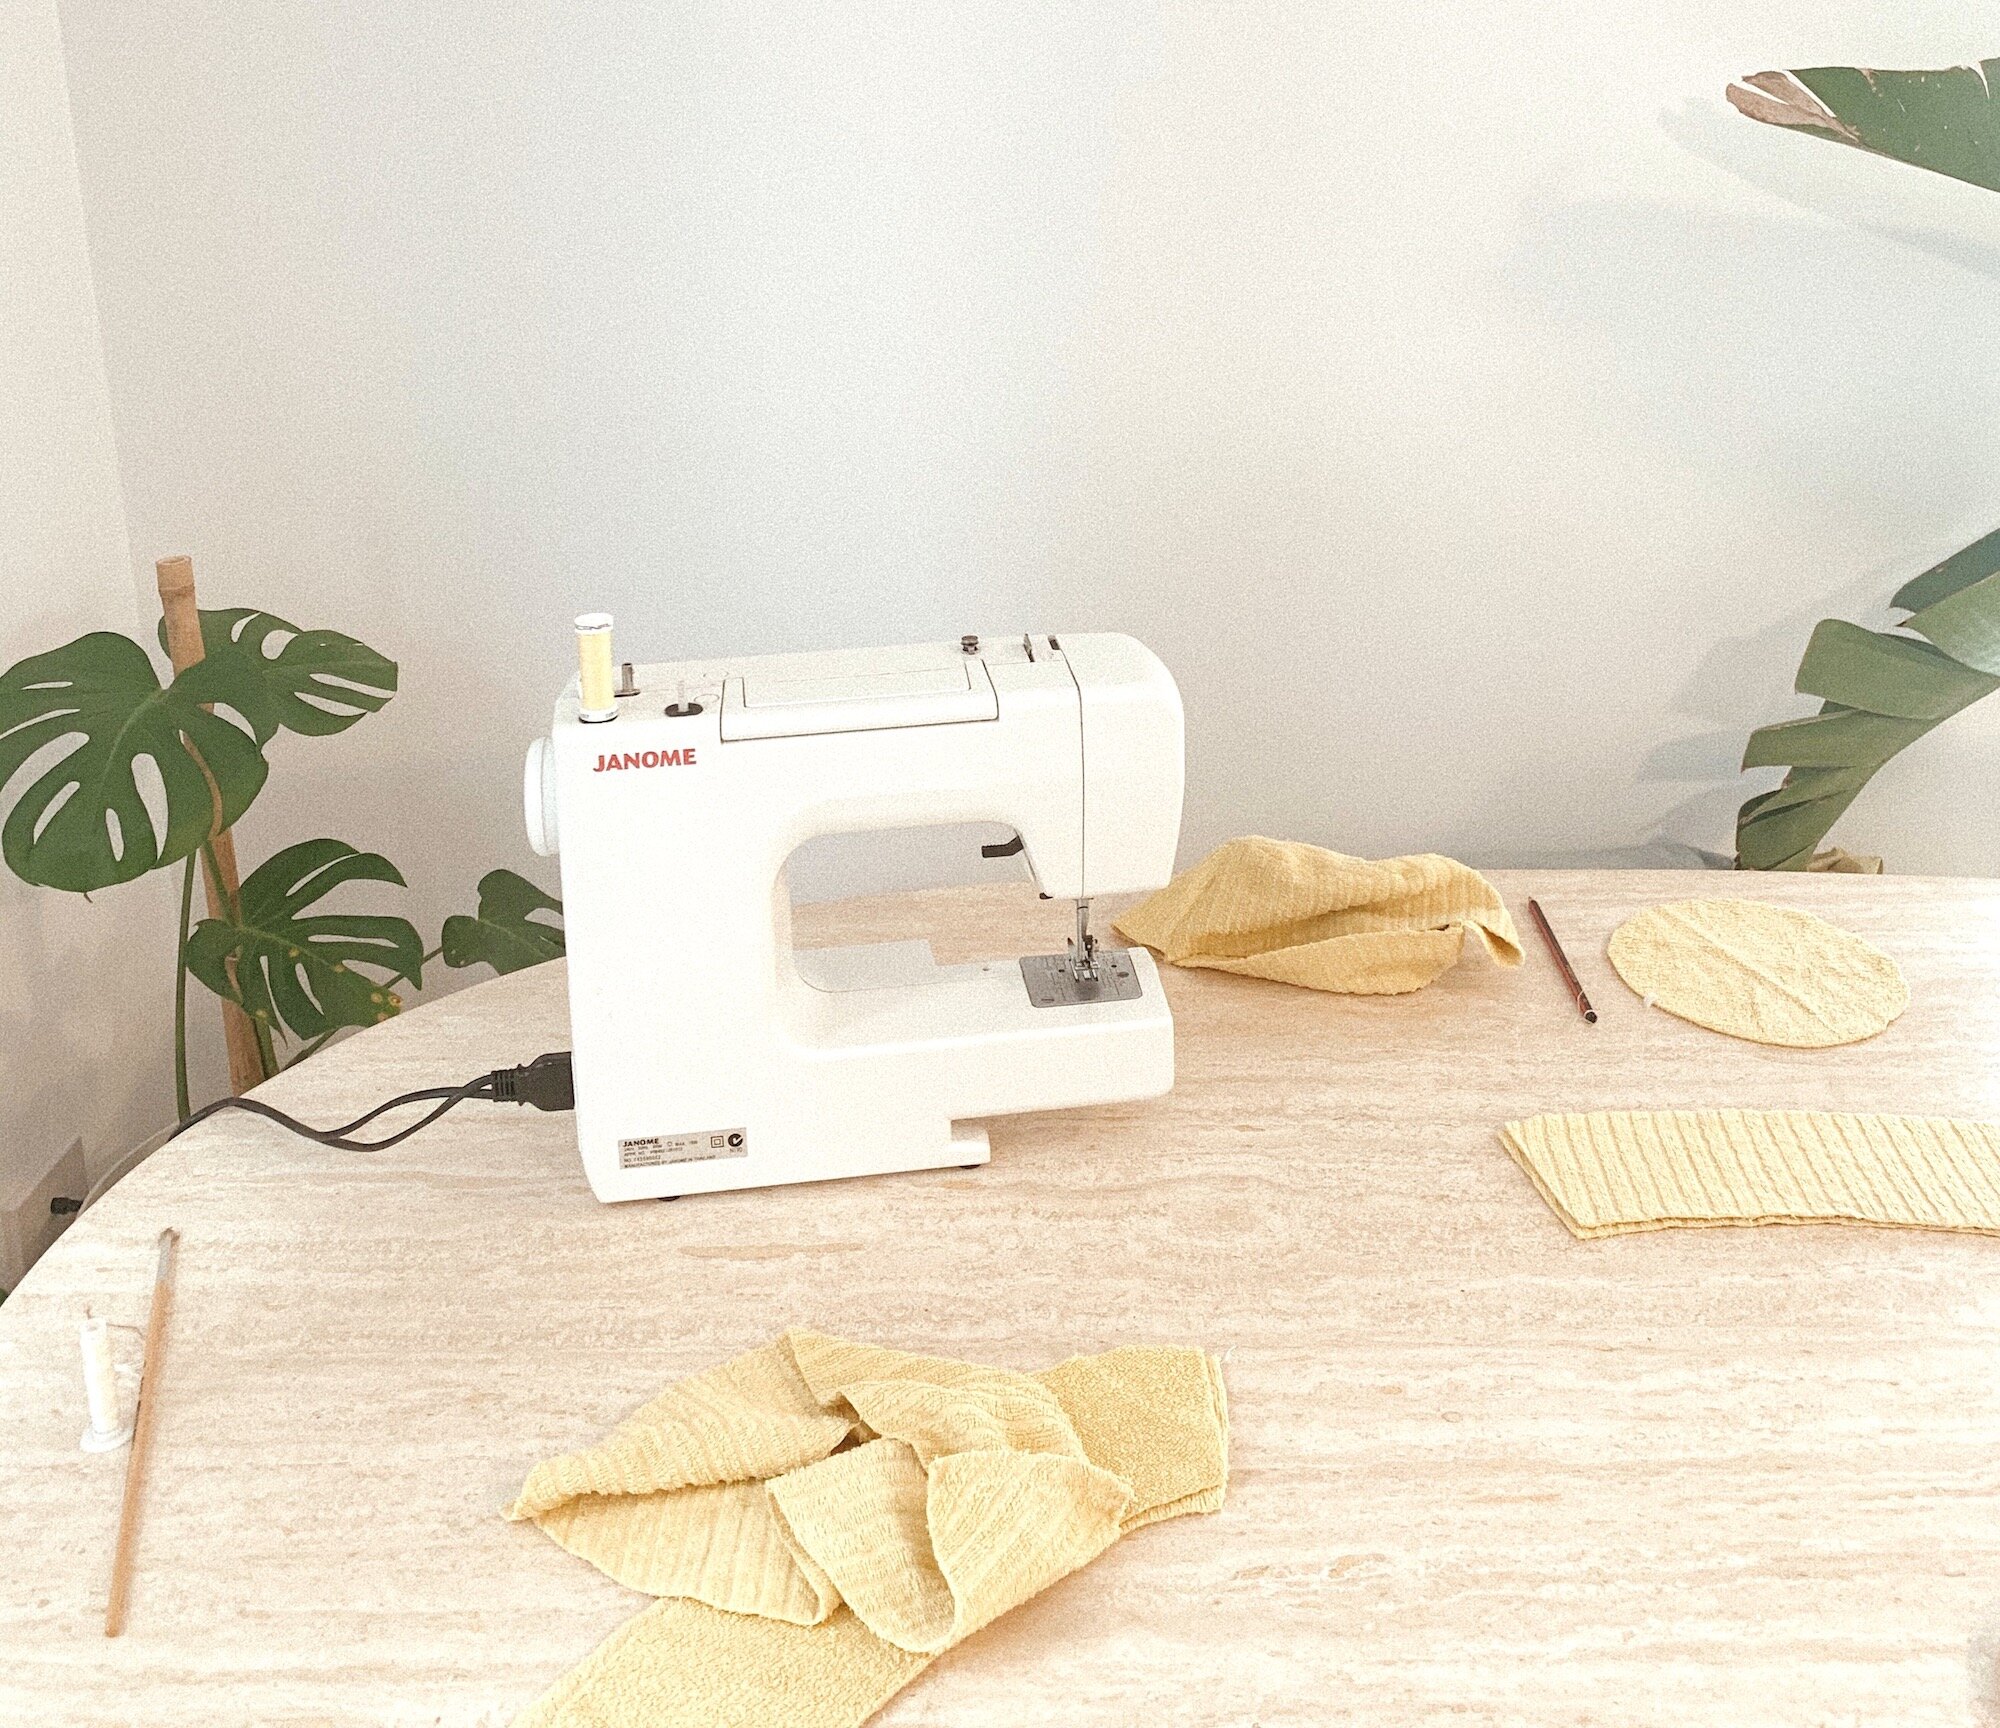 Sew Essentially Sew: Do You Use Home Décor Fabrics for Sewing Garments?